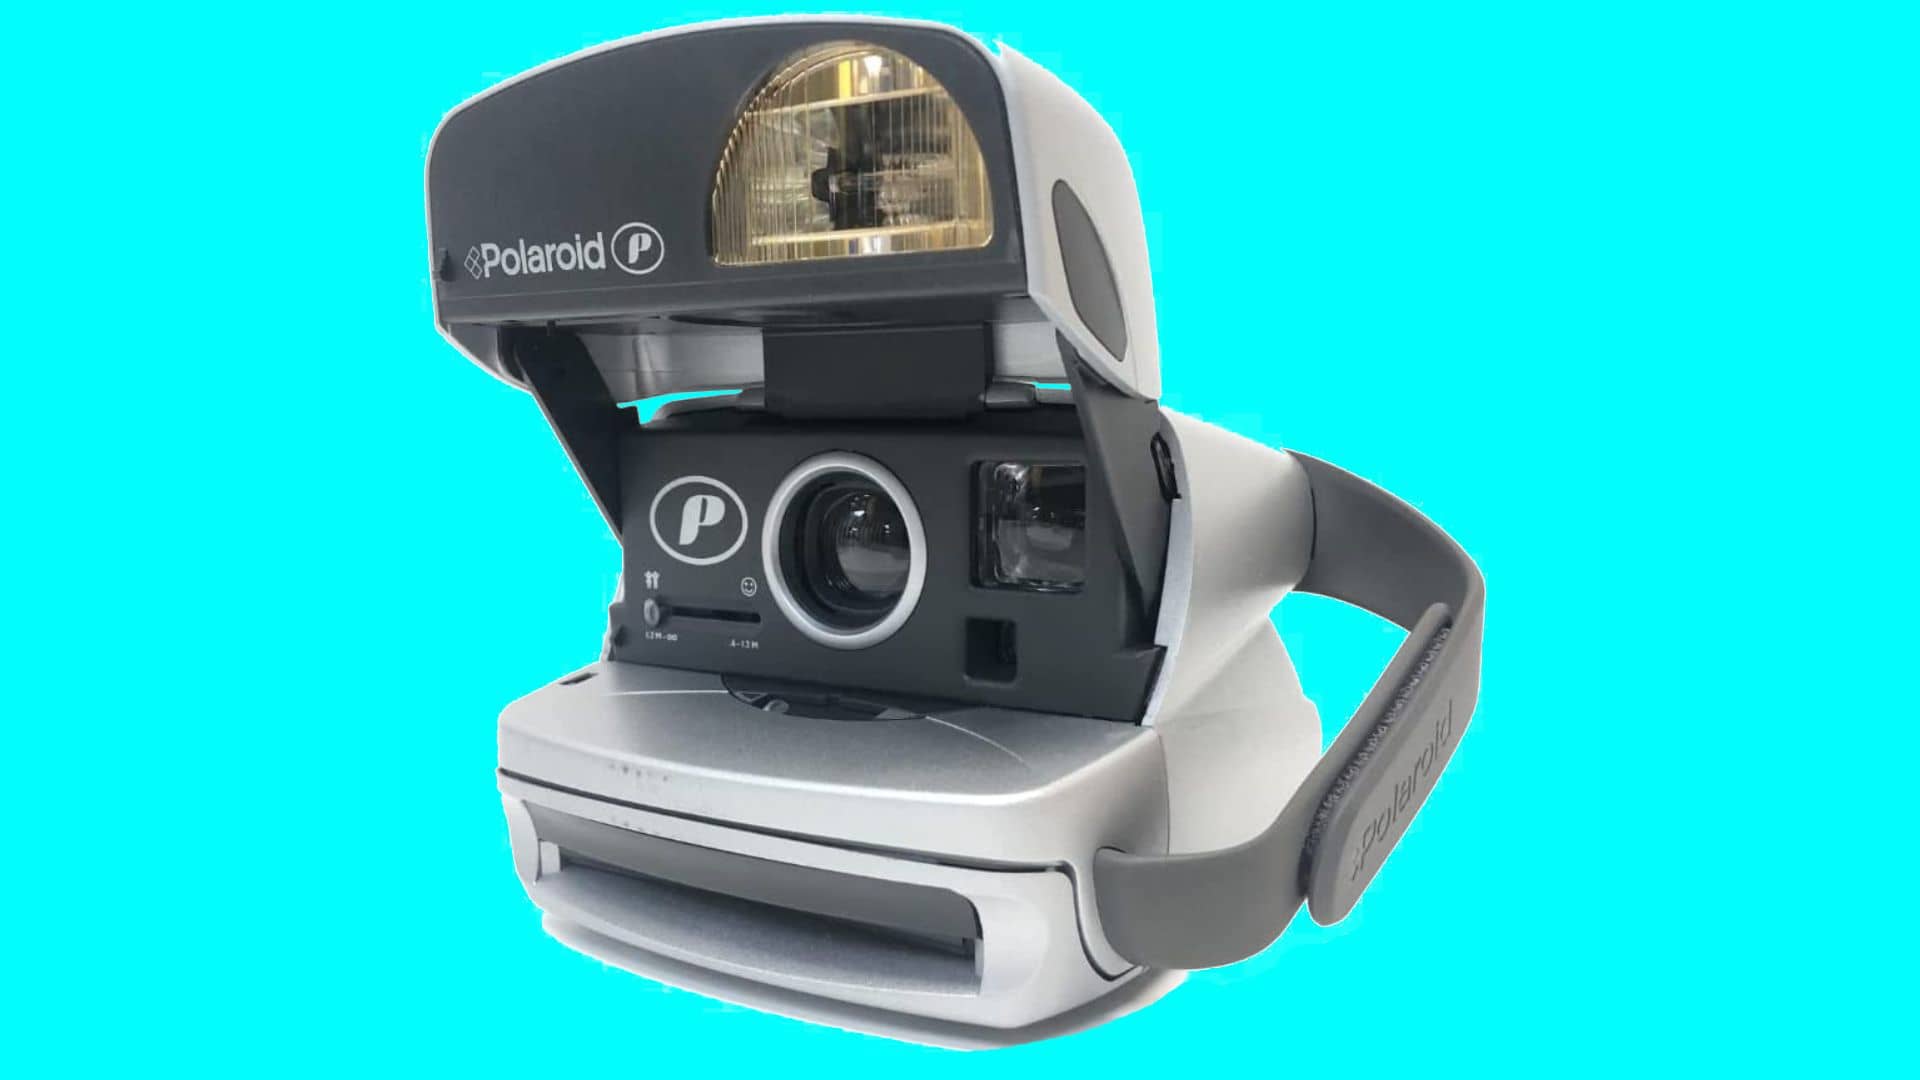 The Instax Mini Link 2 printer being used to print pictures on instant film